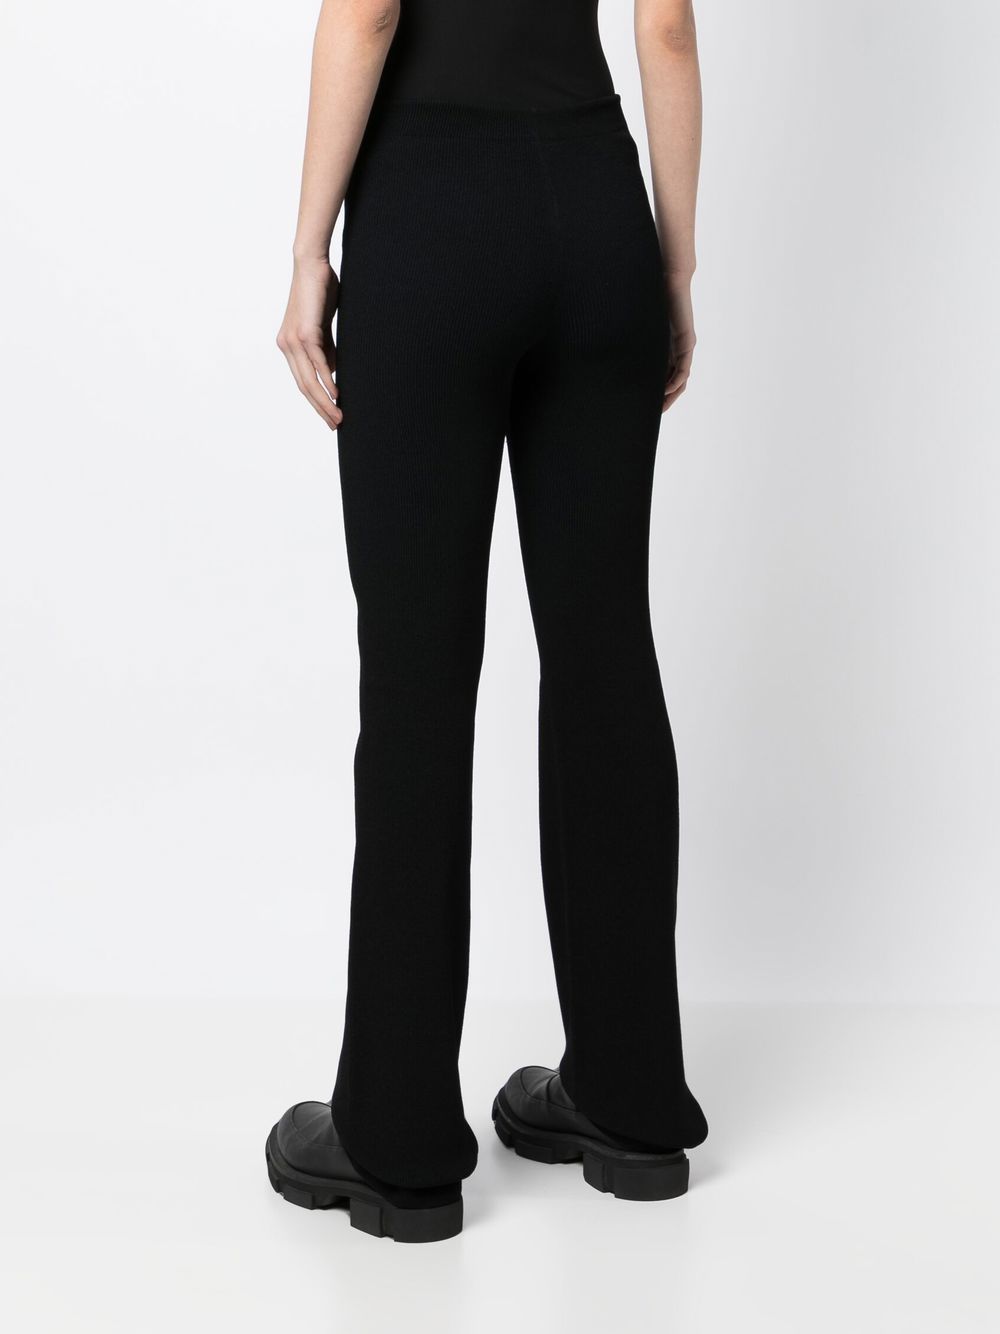 Dion Lee flared cut-out detail trousers | Smart Closet